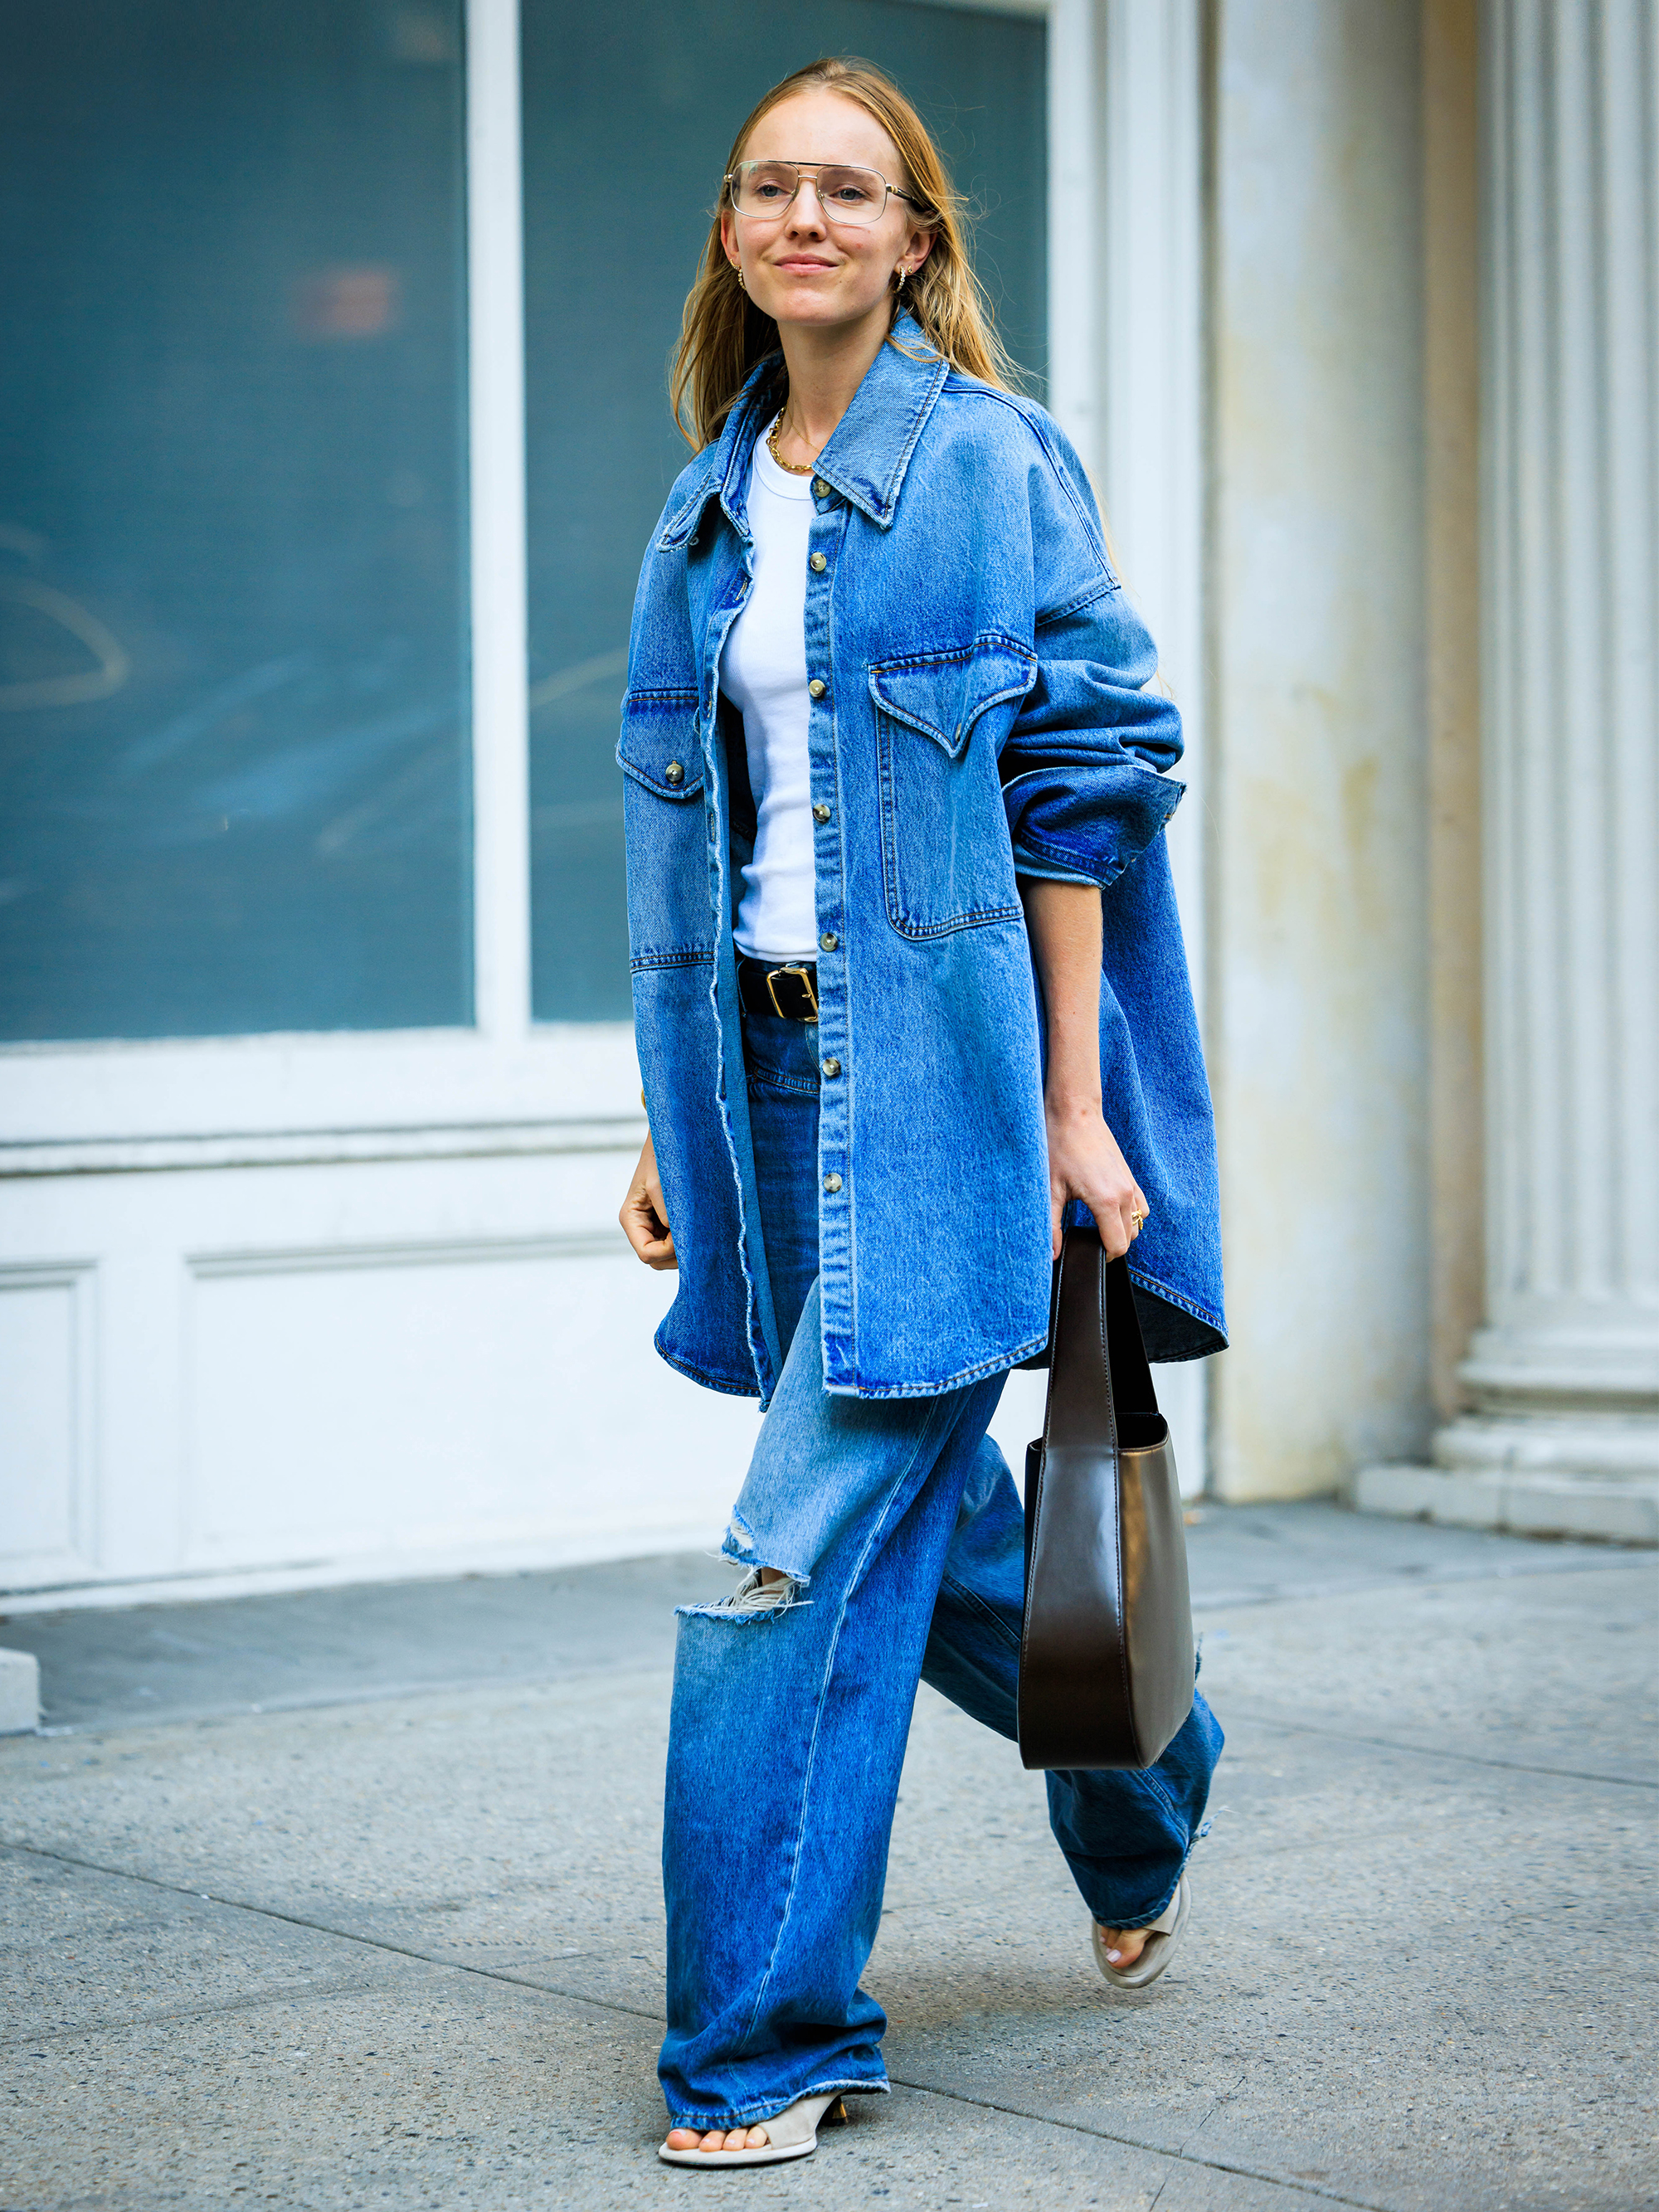 Double Denim How To Pull Off Fashions Most Controversial Look